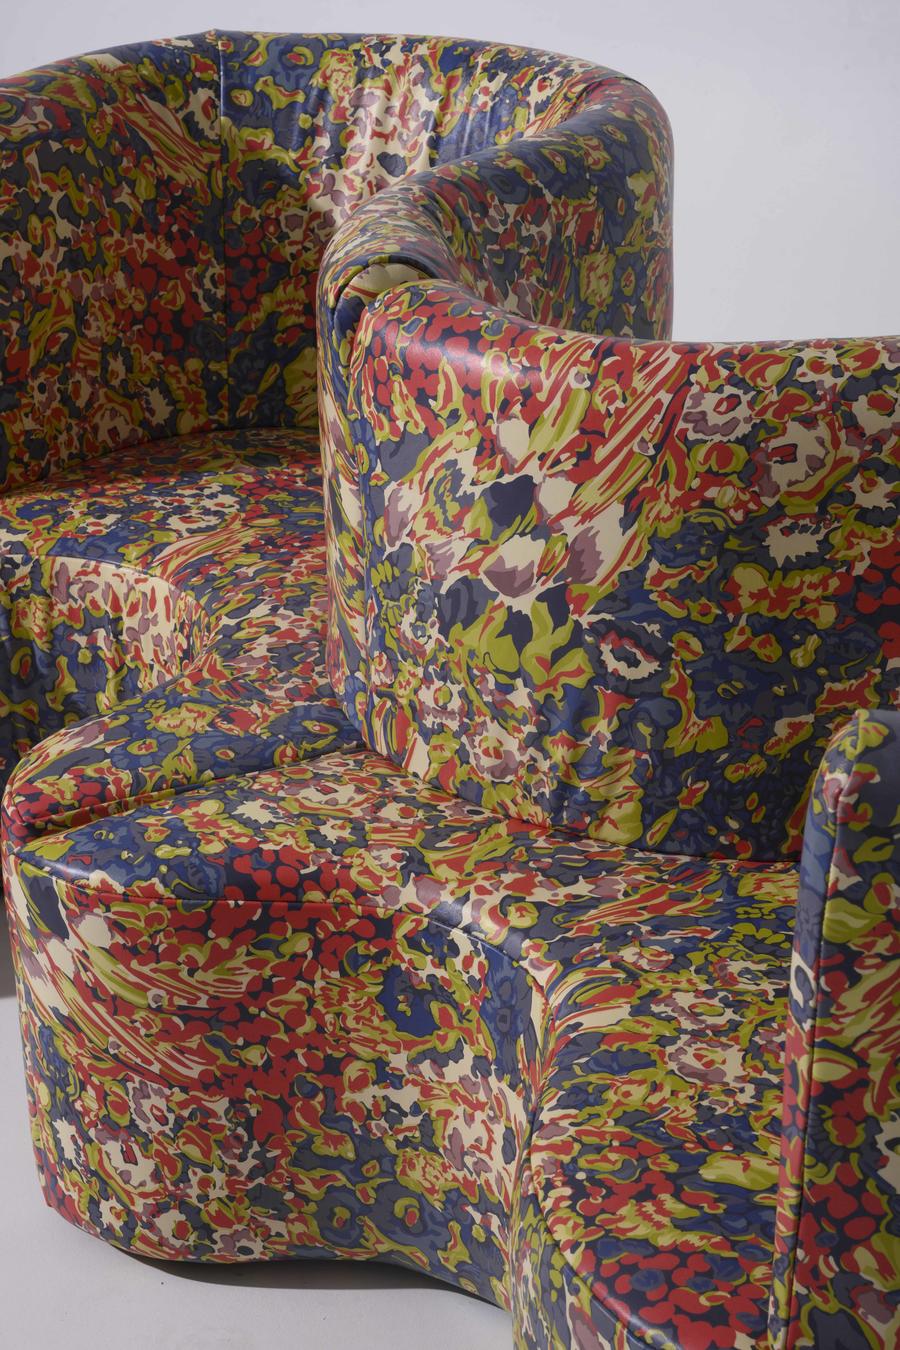 A sofa covered in Florabunda from Moore & Giles